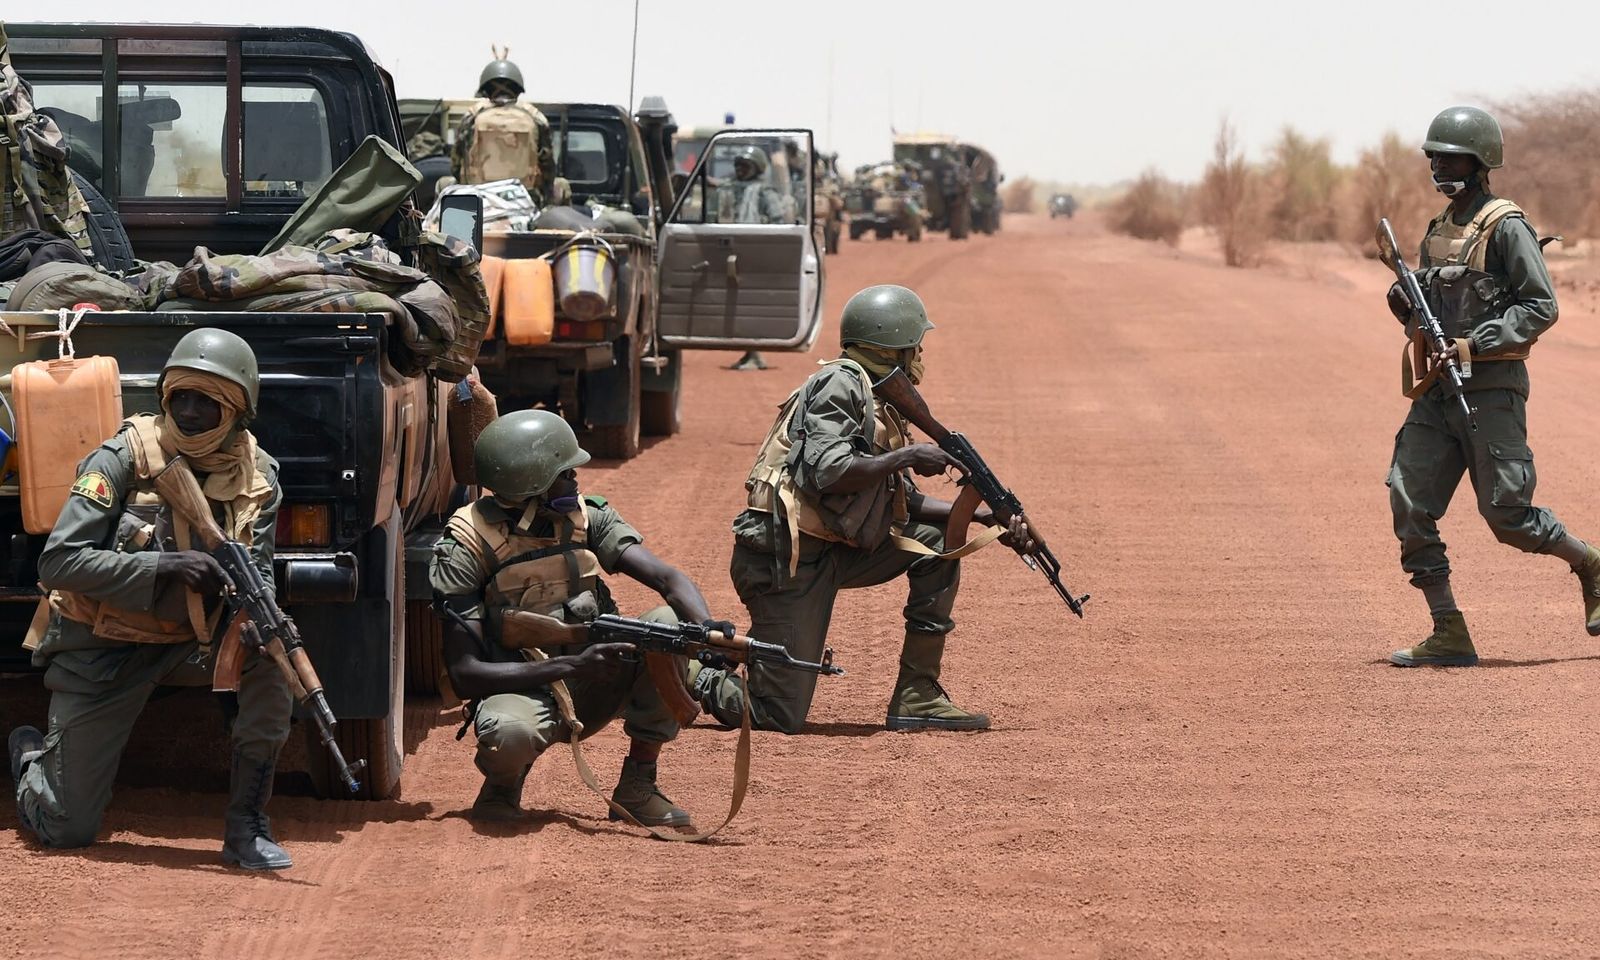 Western countries pile pressure on Mali over Wagner presence